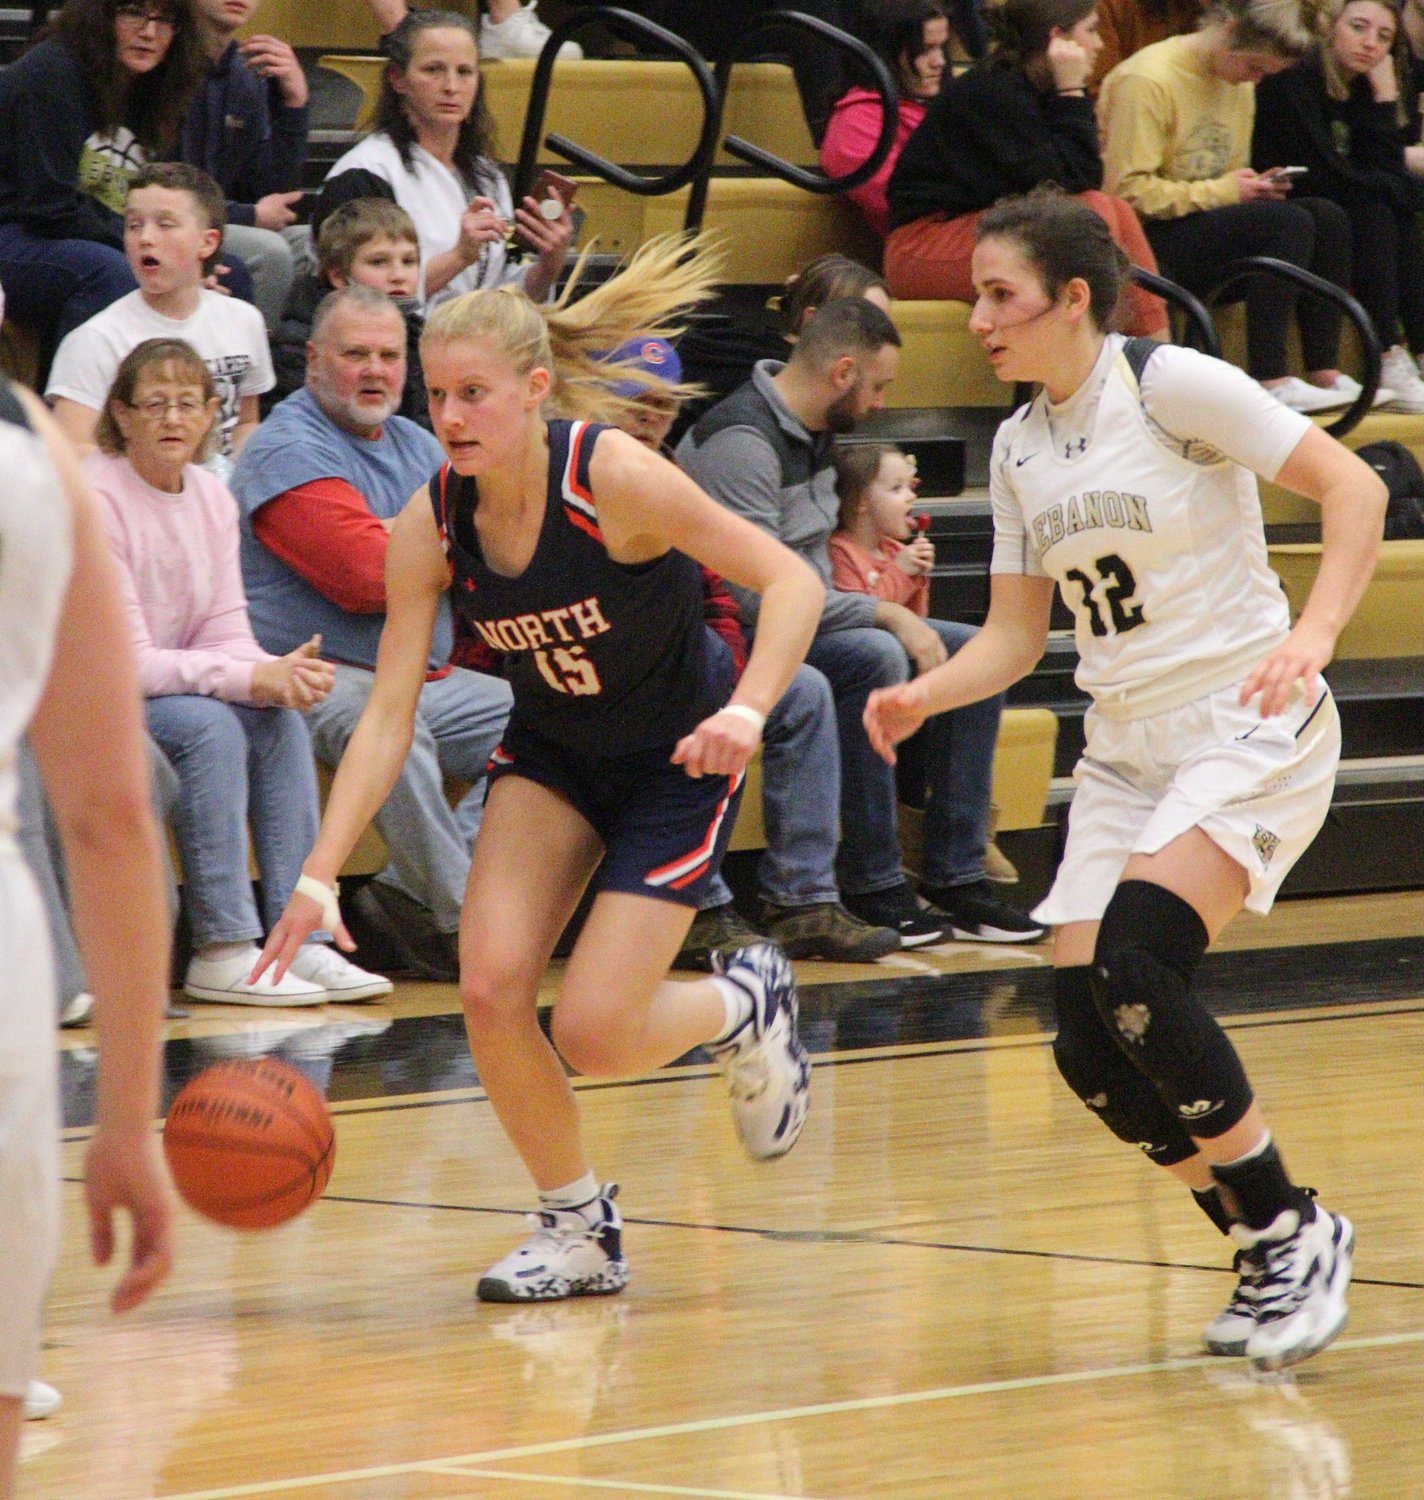 Senior Madi Welch led the rally on the defensive end for the Chargers guarding Lebanon’s top scorer in Alexis Wines.